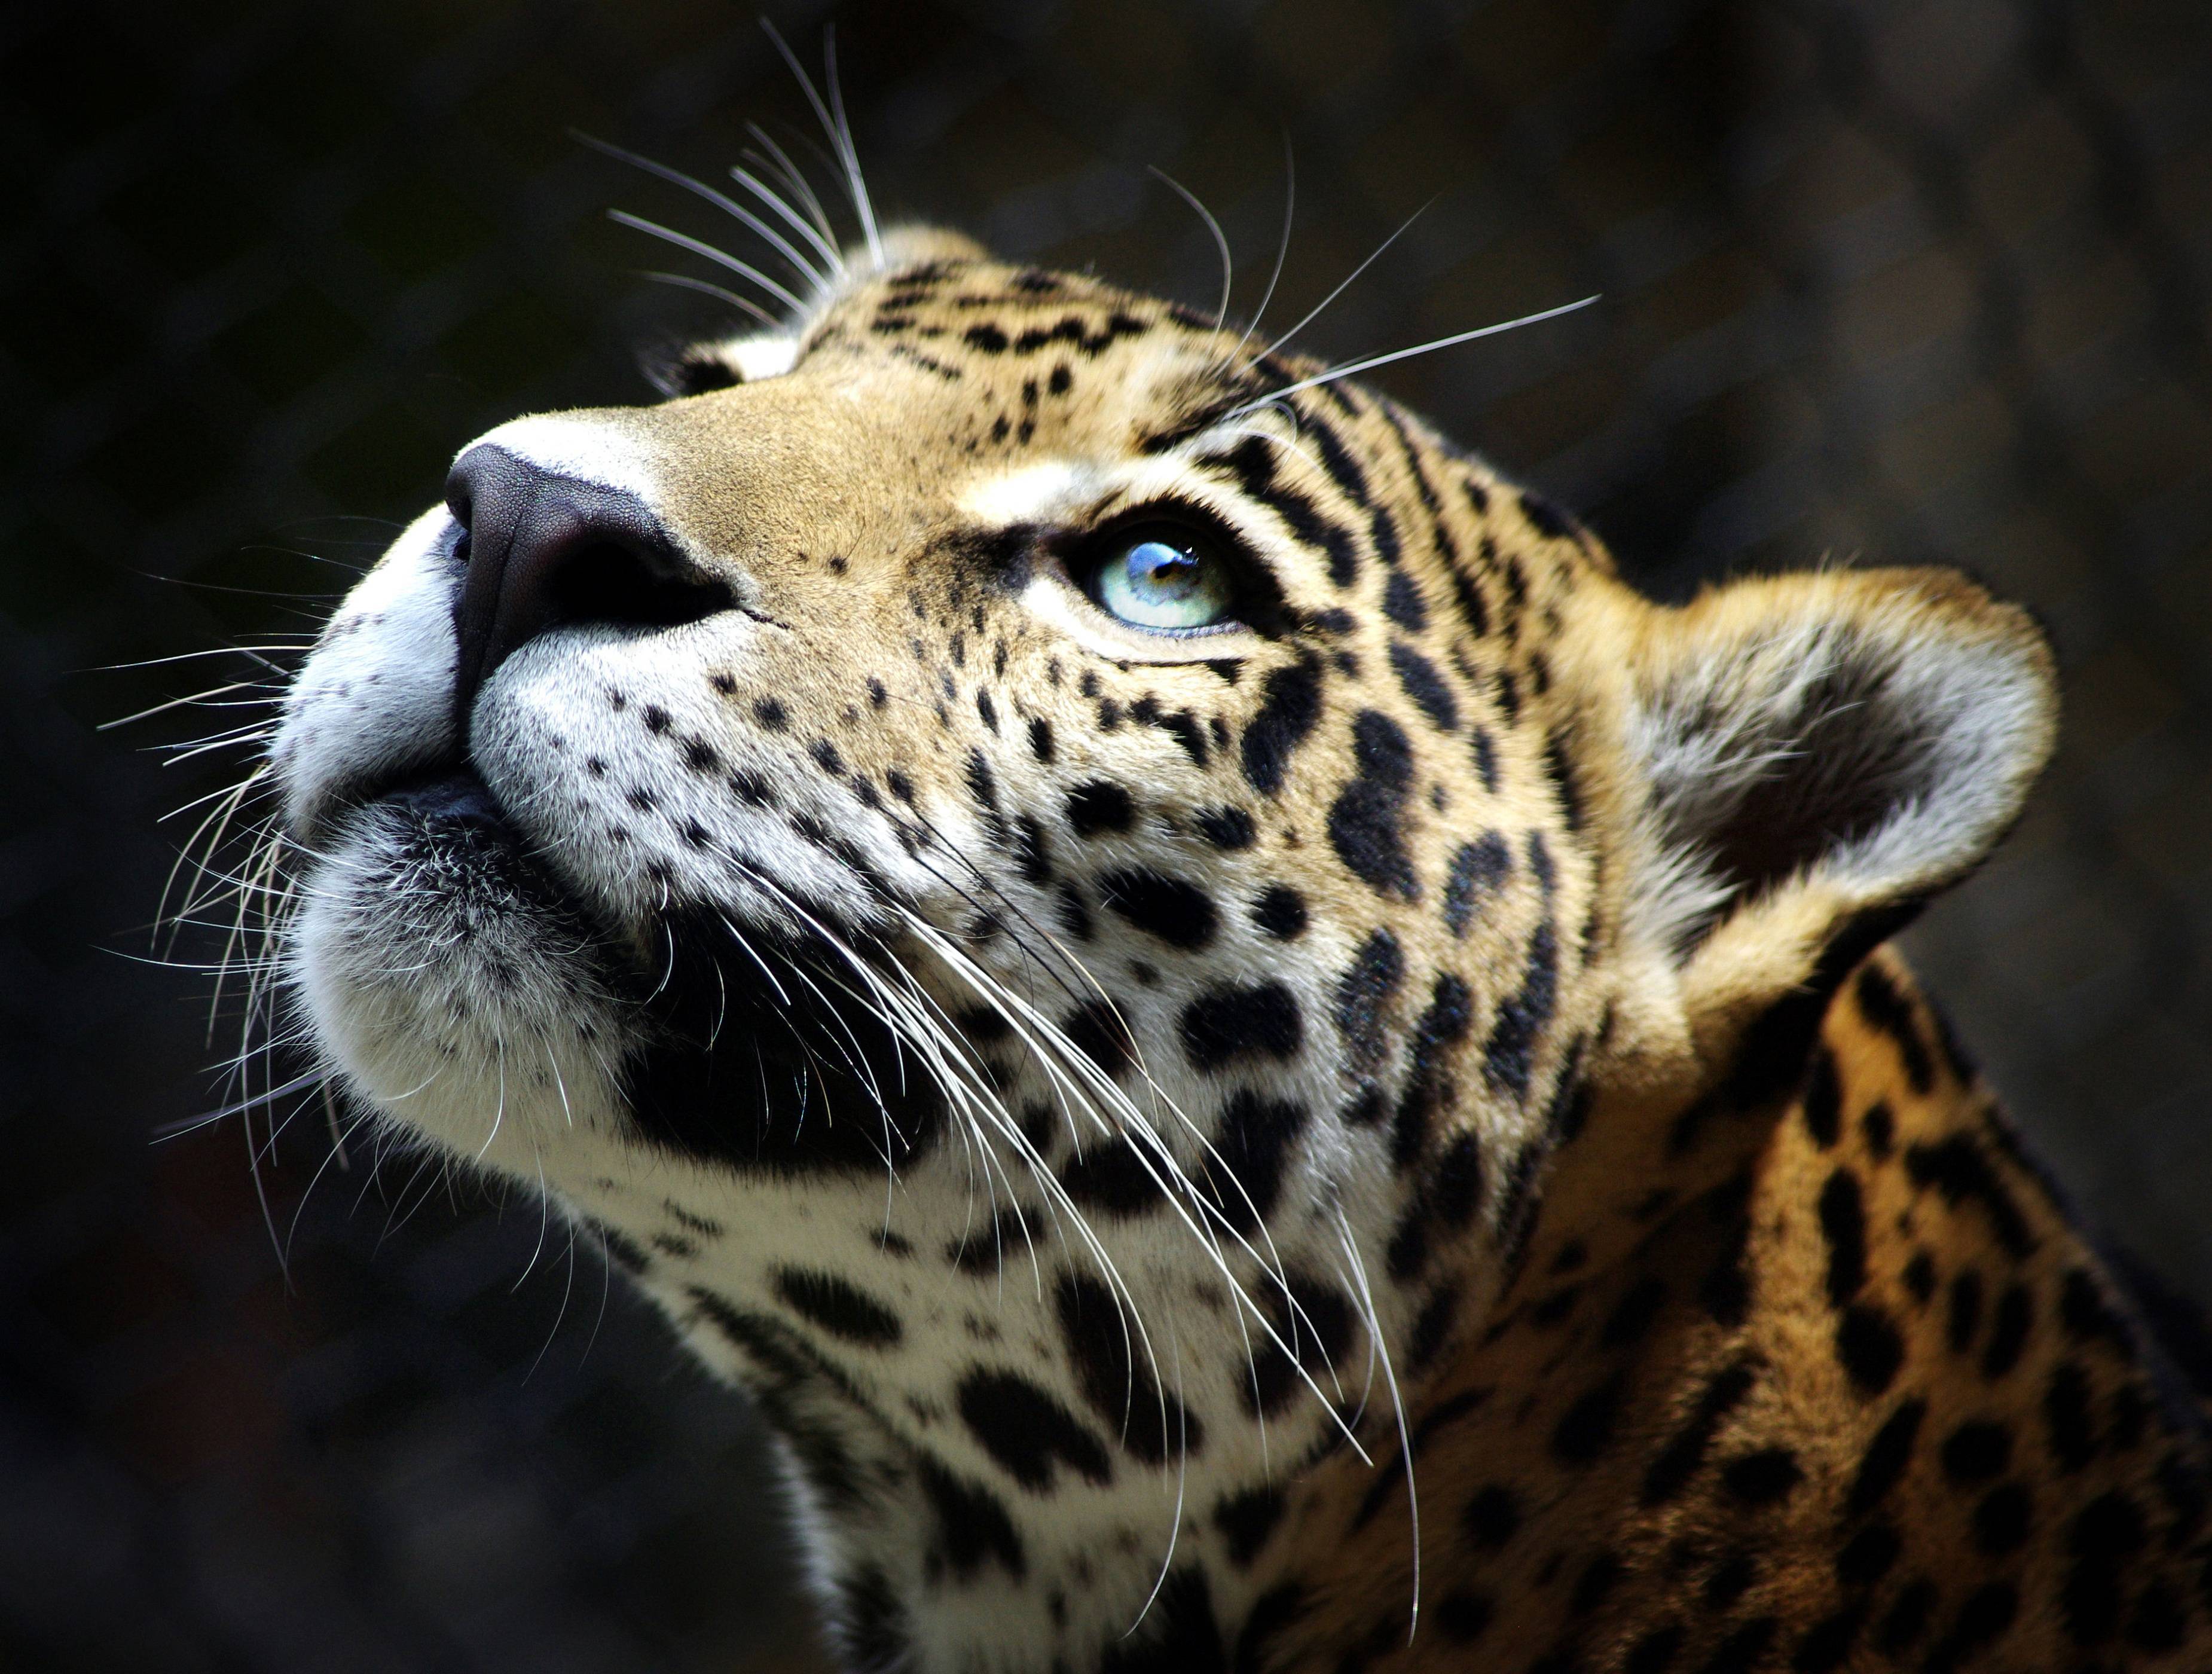 Colorful Leopard Iphone Wallpapers - Wallpaper Cave